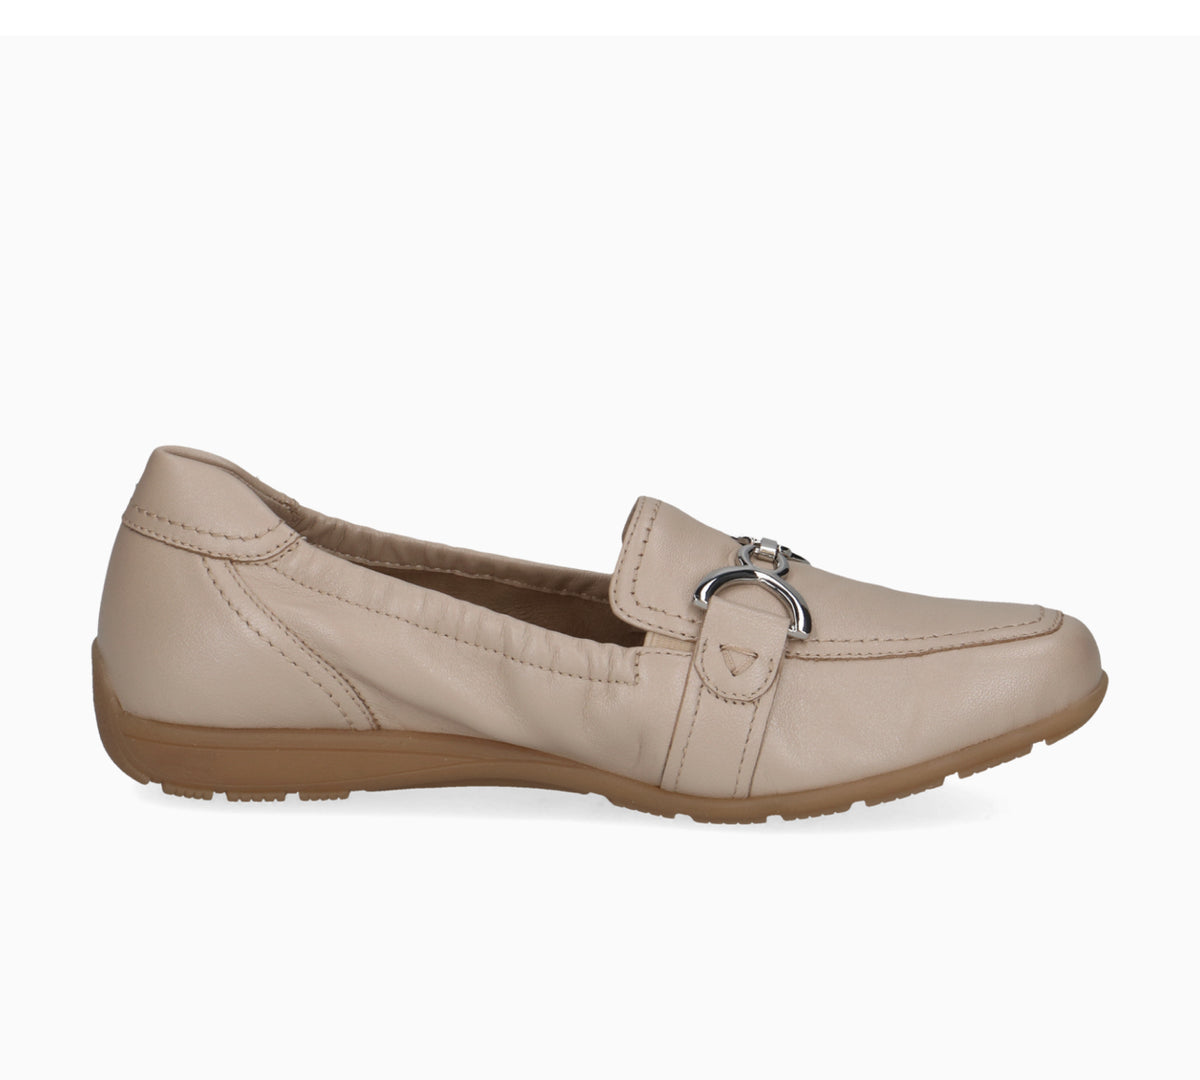 Caprice - 24650 Beige Chain Loafer